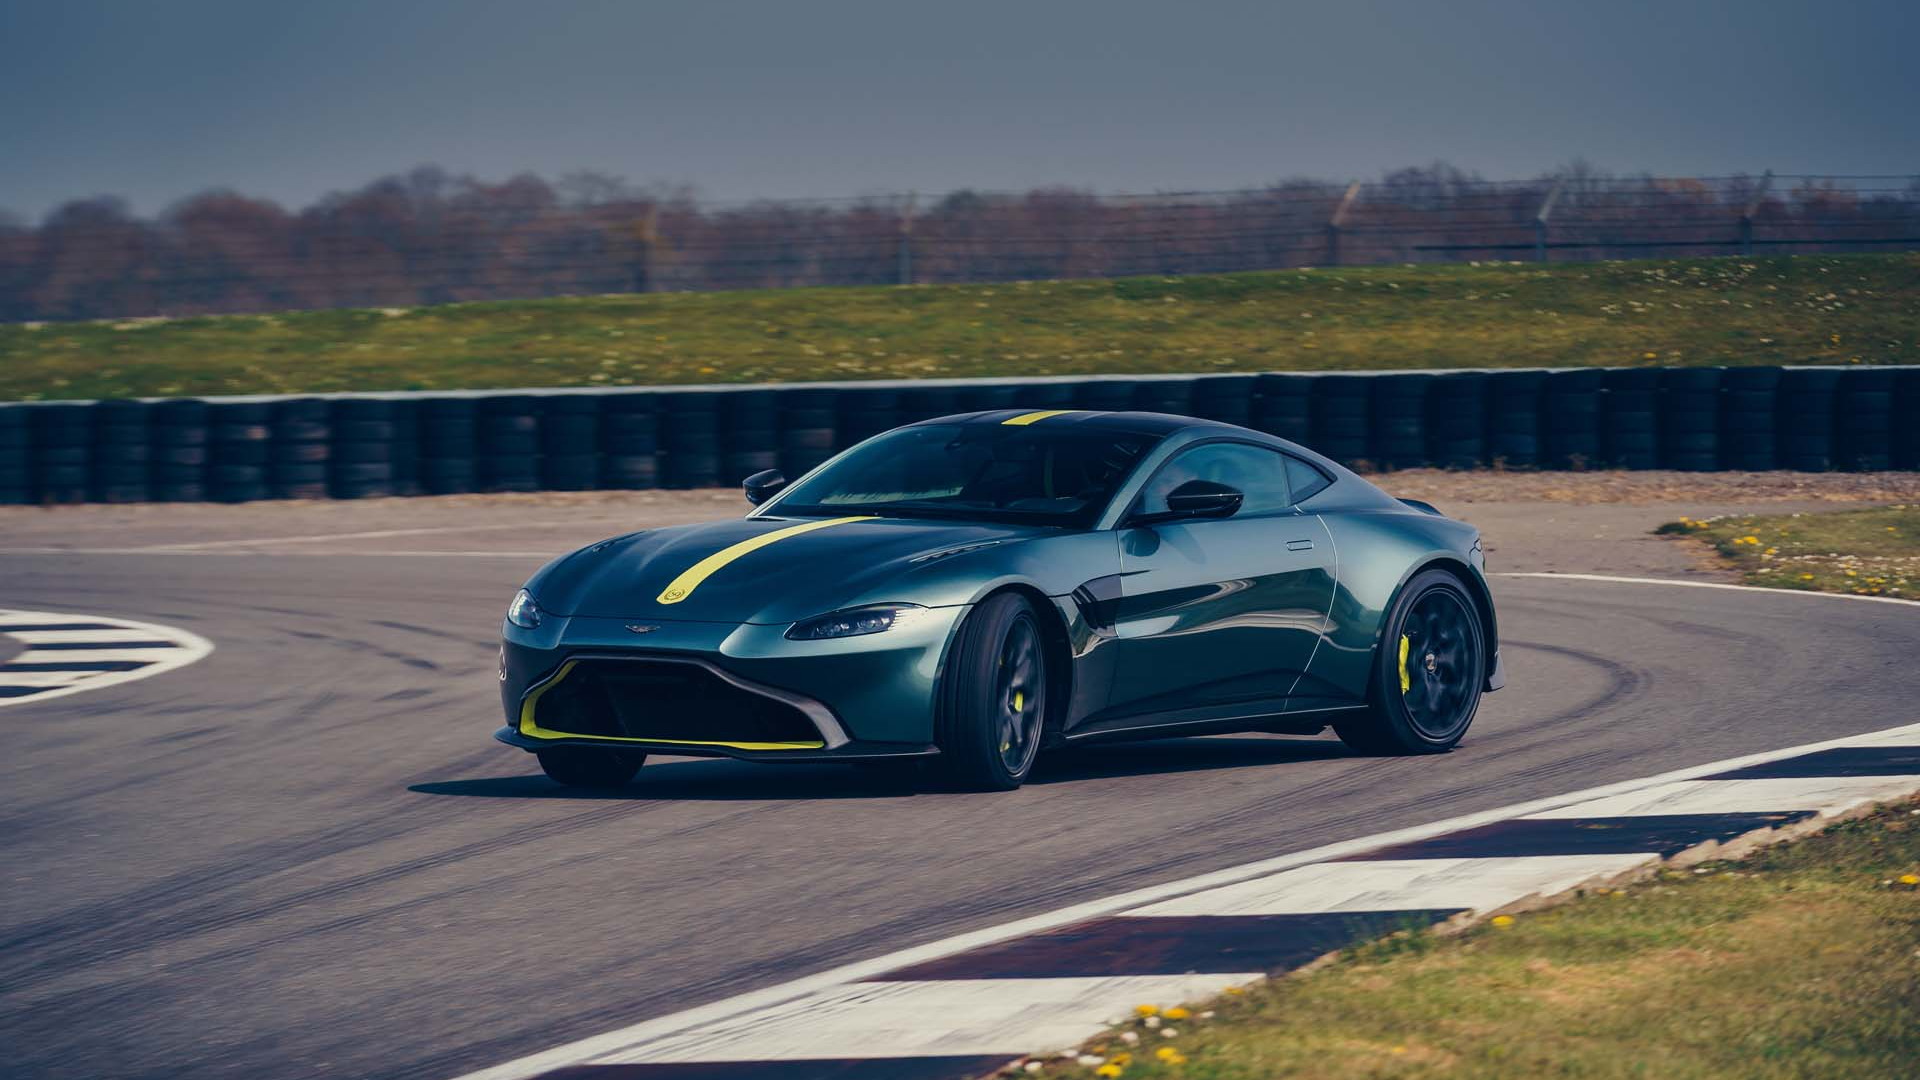 Aston Martin going hyper-limited with Vantage special editions